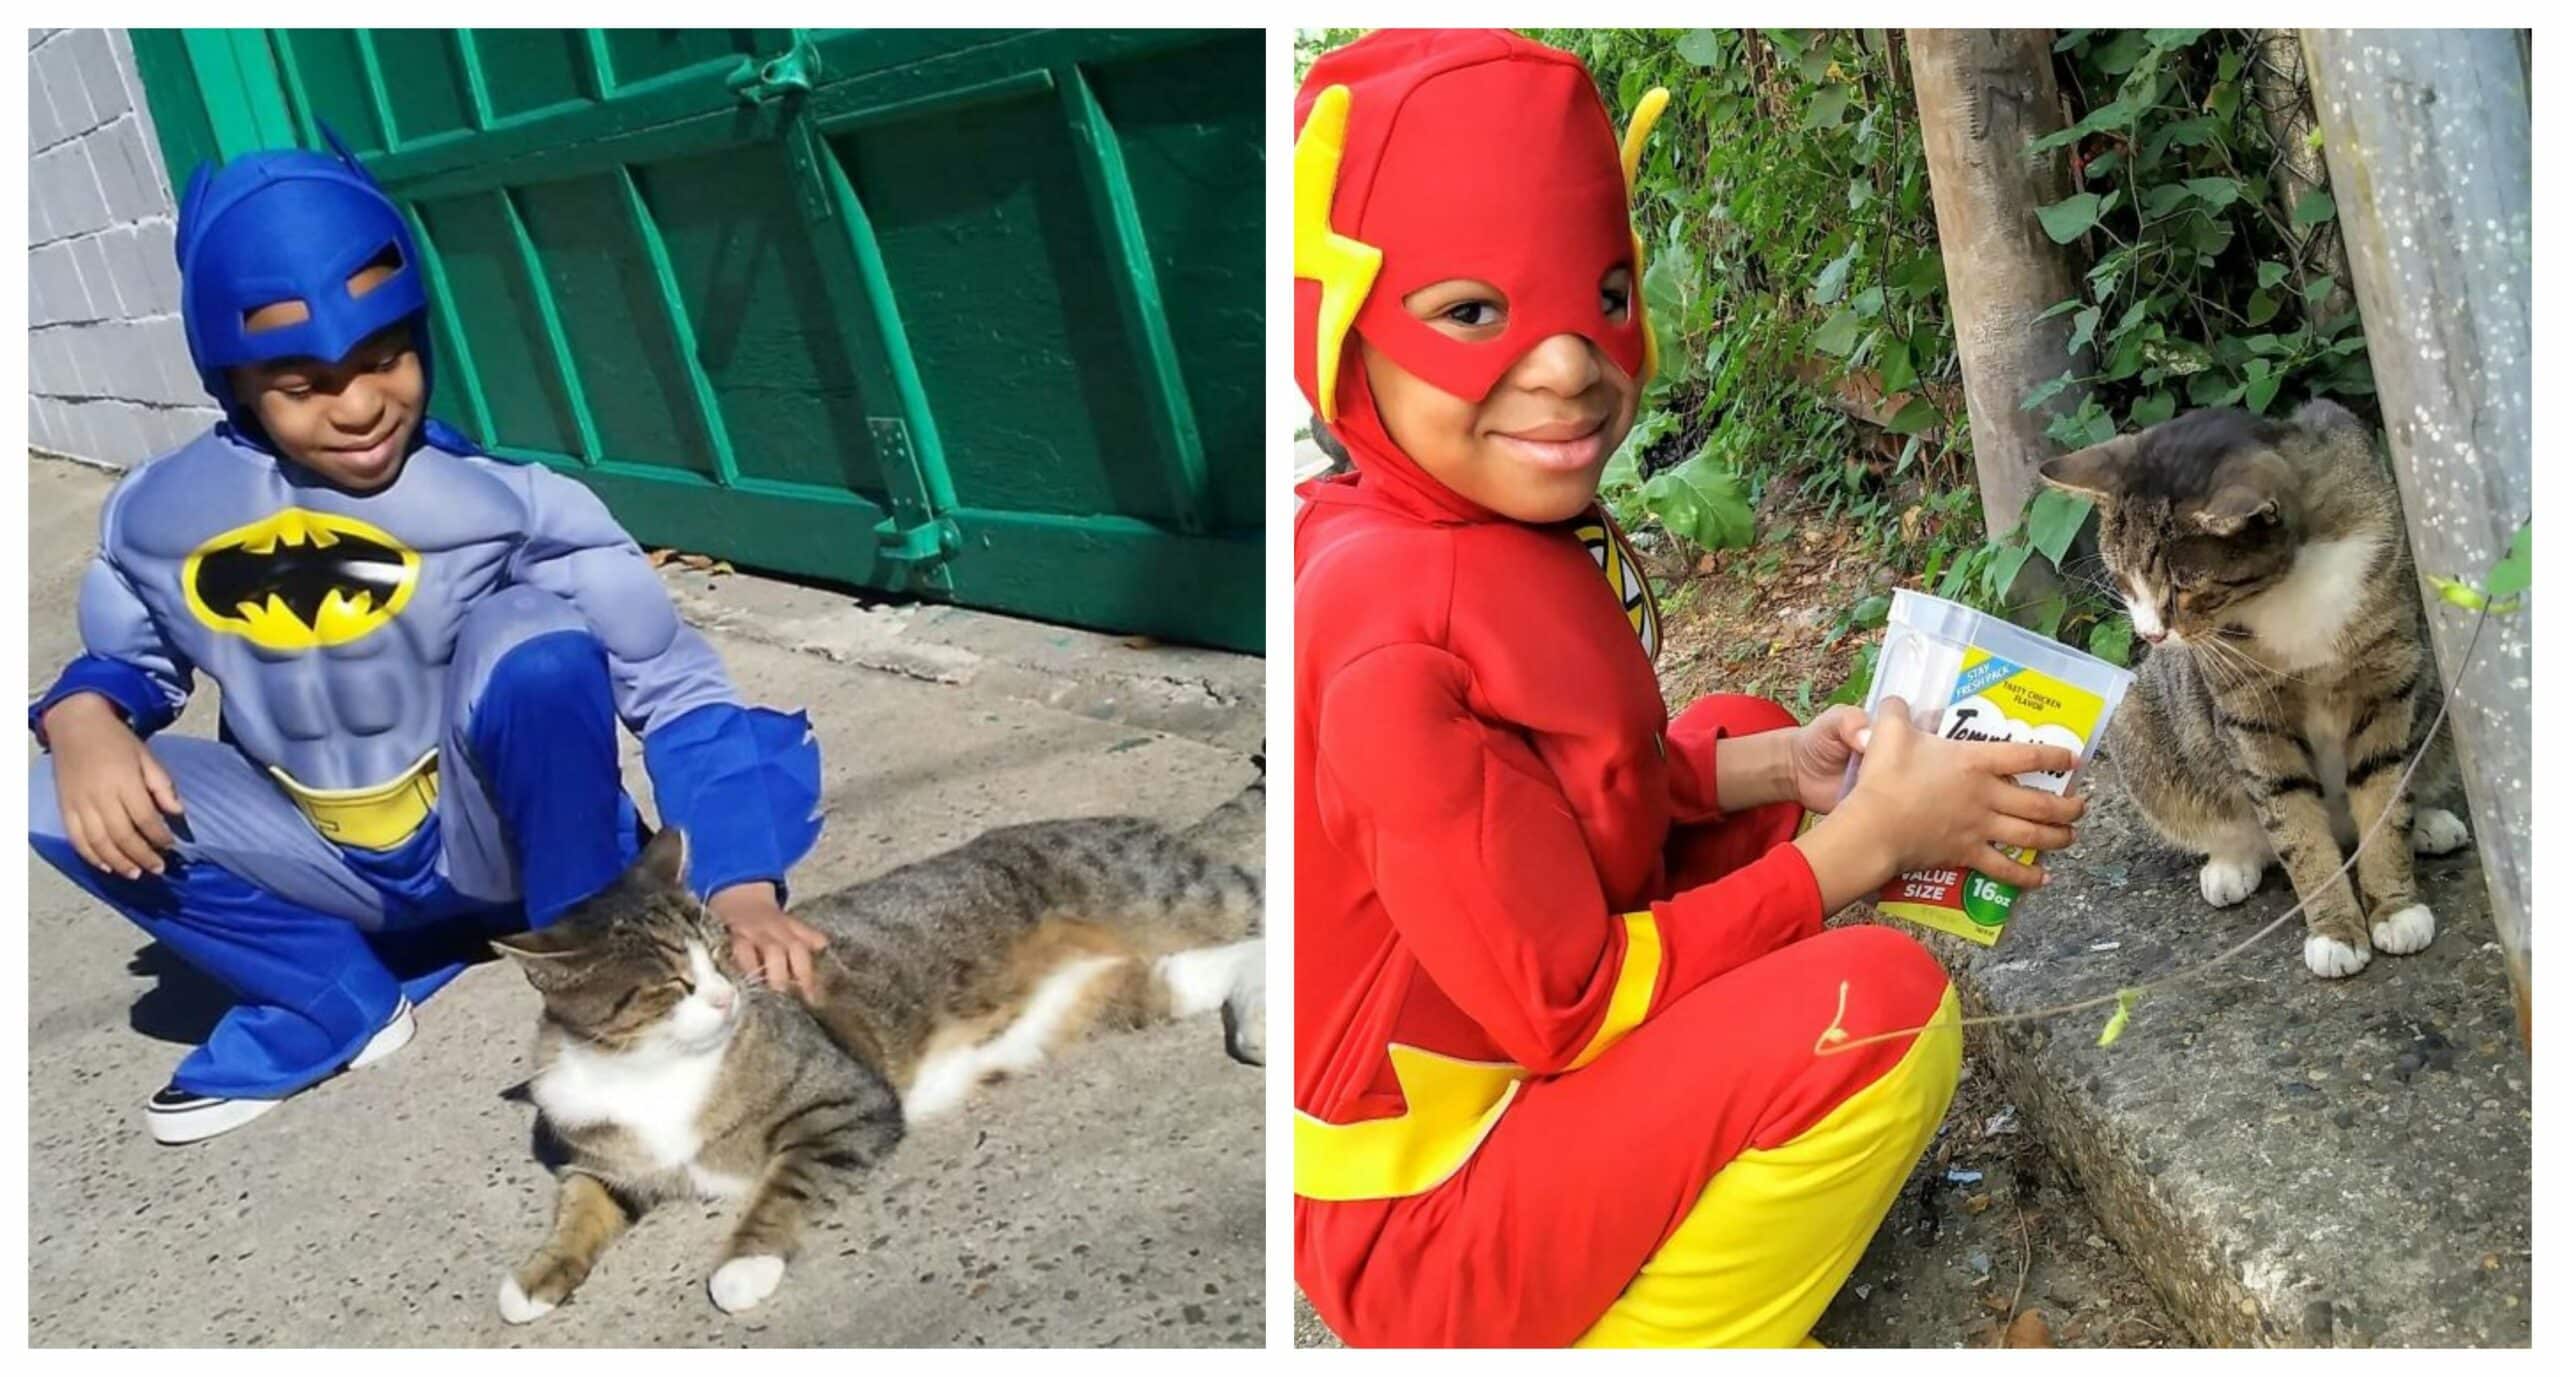 The 5-Year-Old Superhero Who Helps Homeless Cats is called Catman